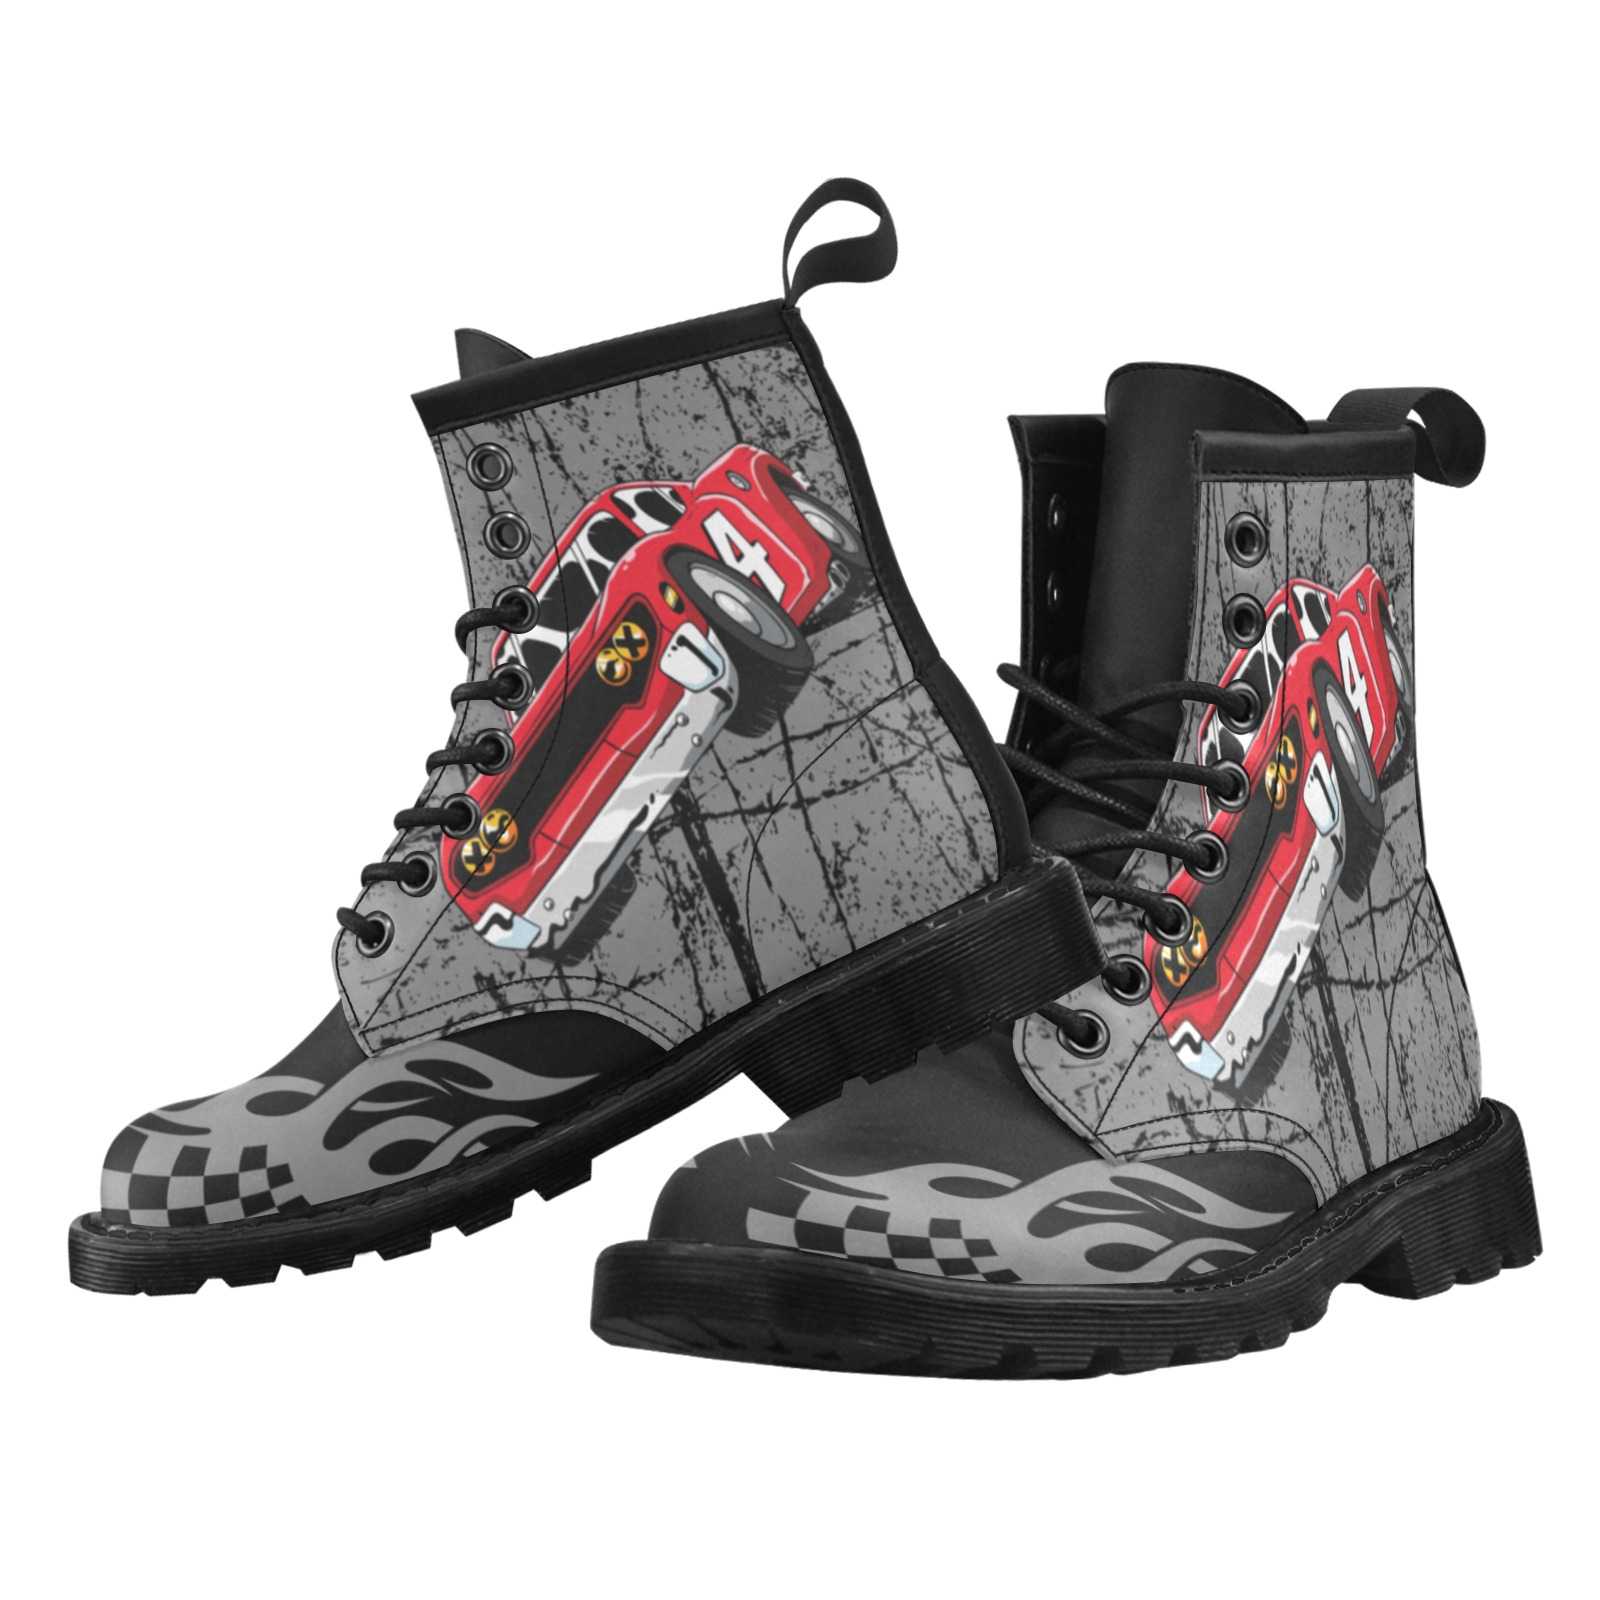 Racing PU Leather Boots